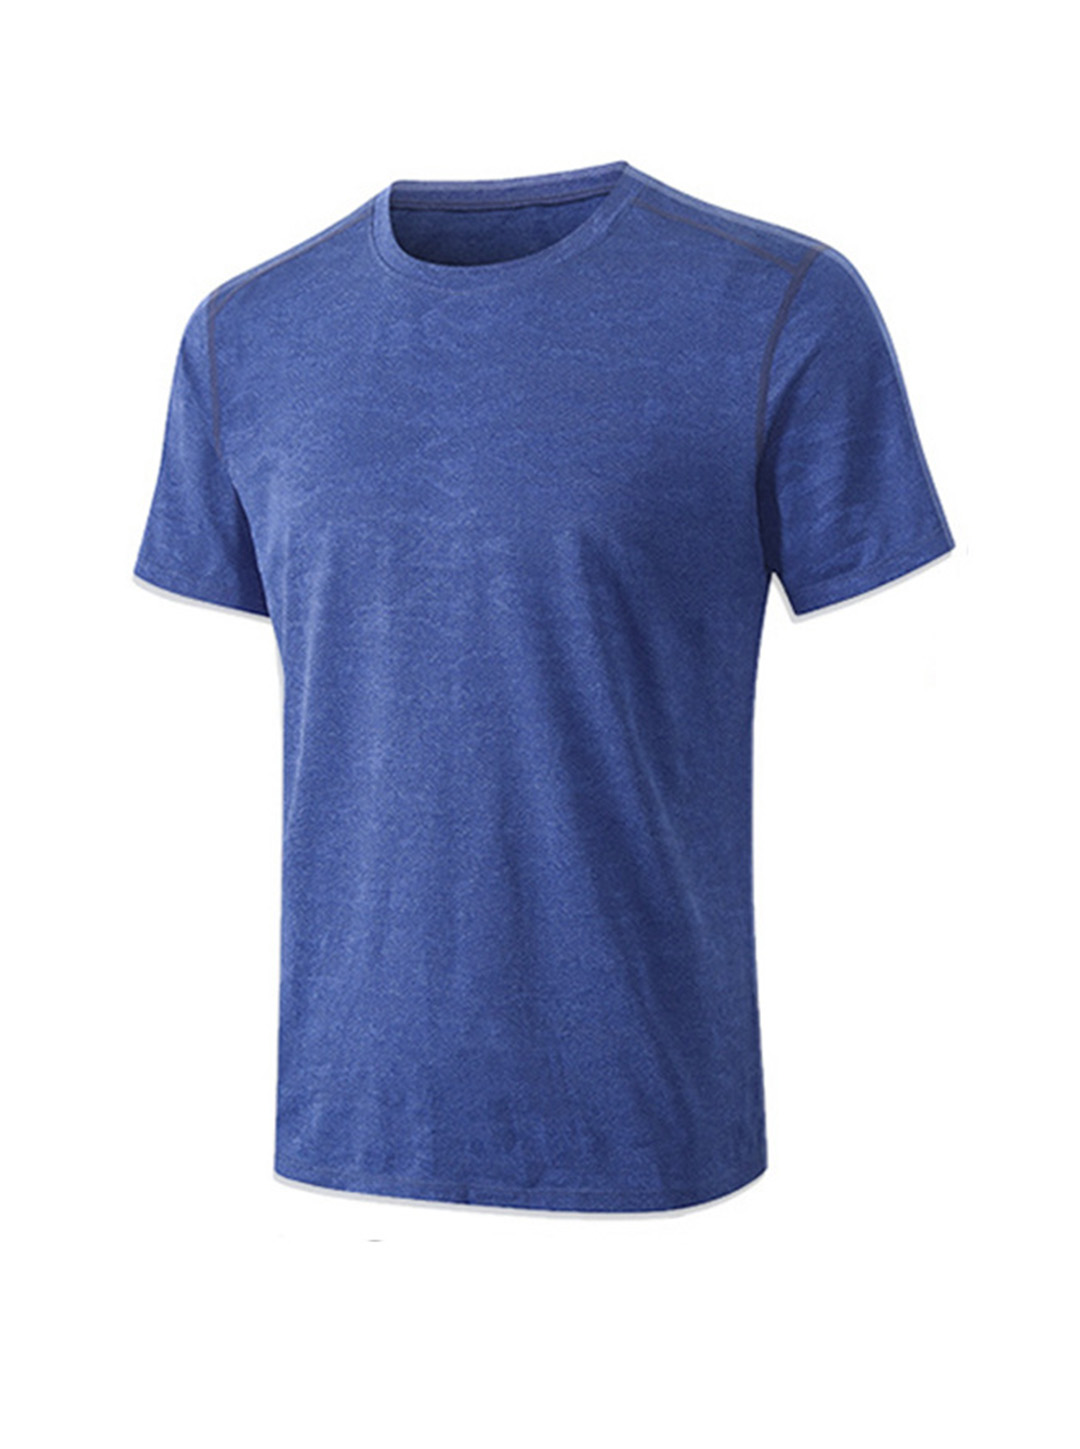 Larry loose casual  T-shirt